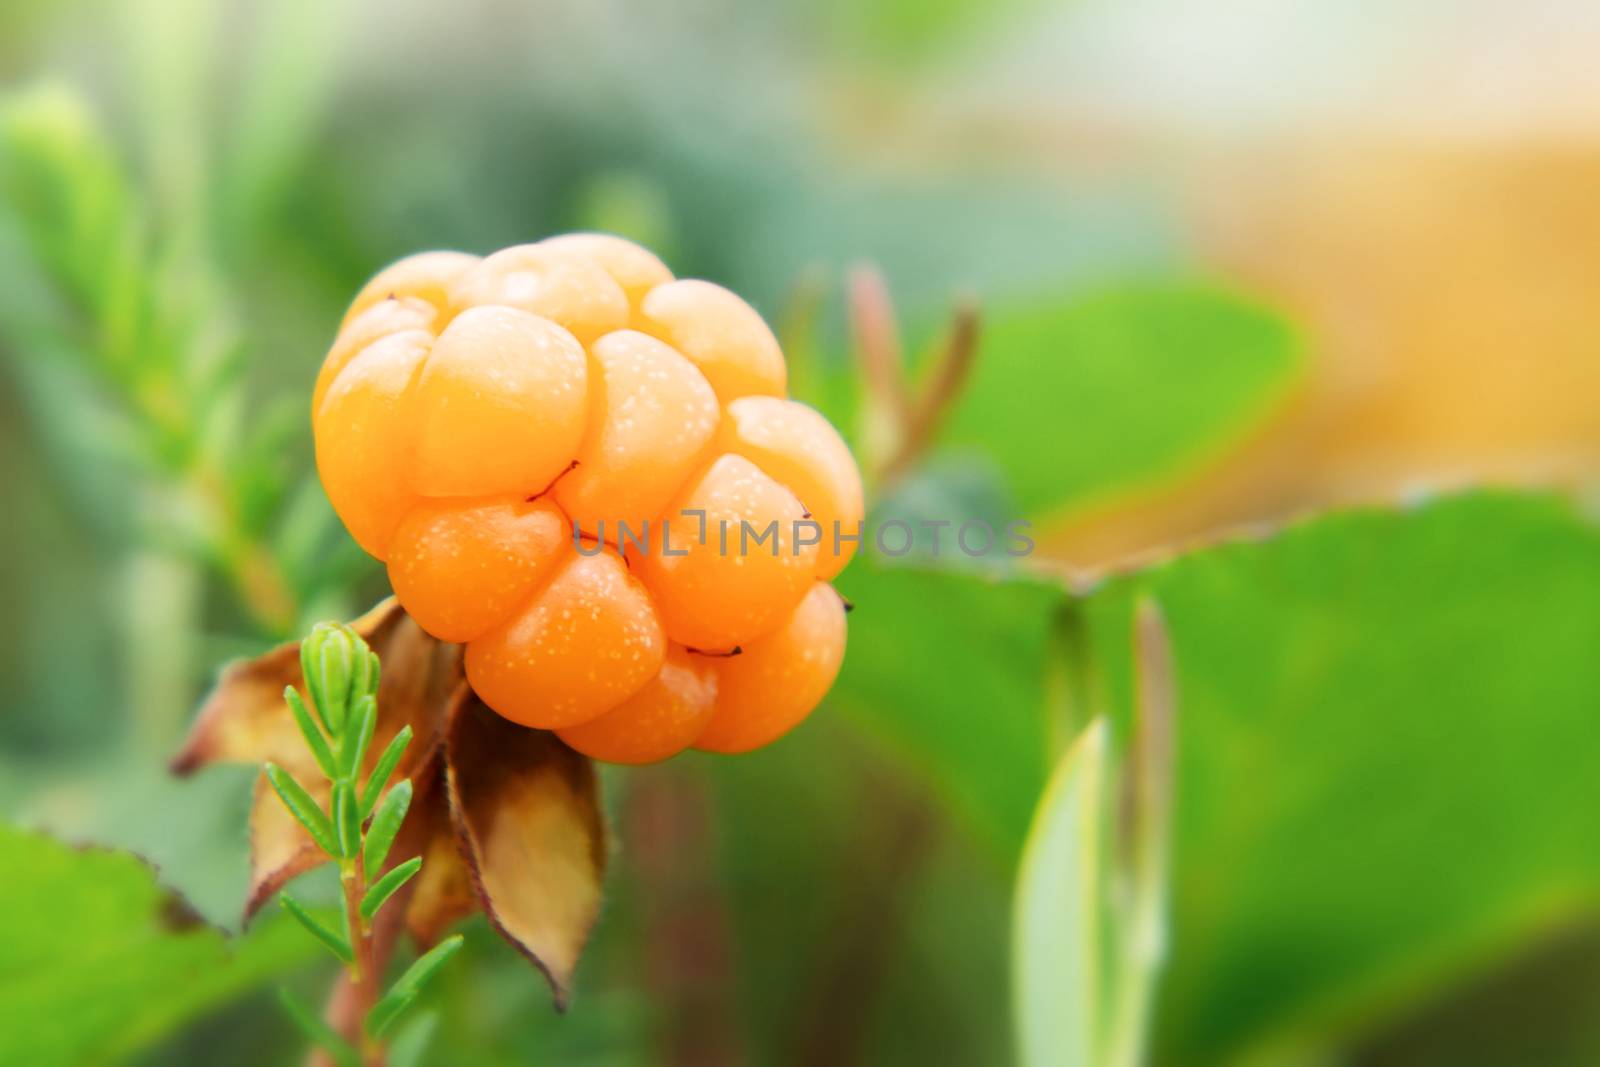 Cloudberry berry grows in a summer forest in a swamp.